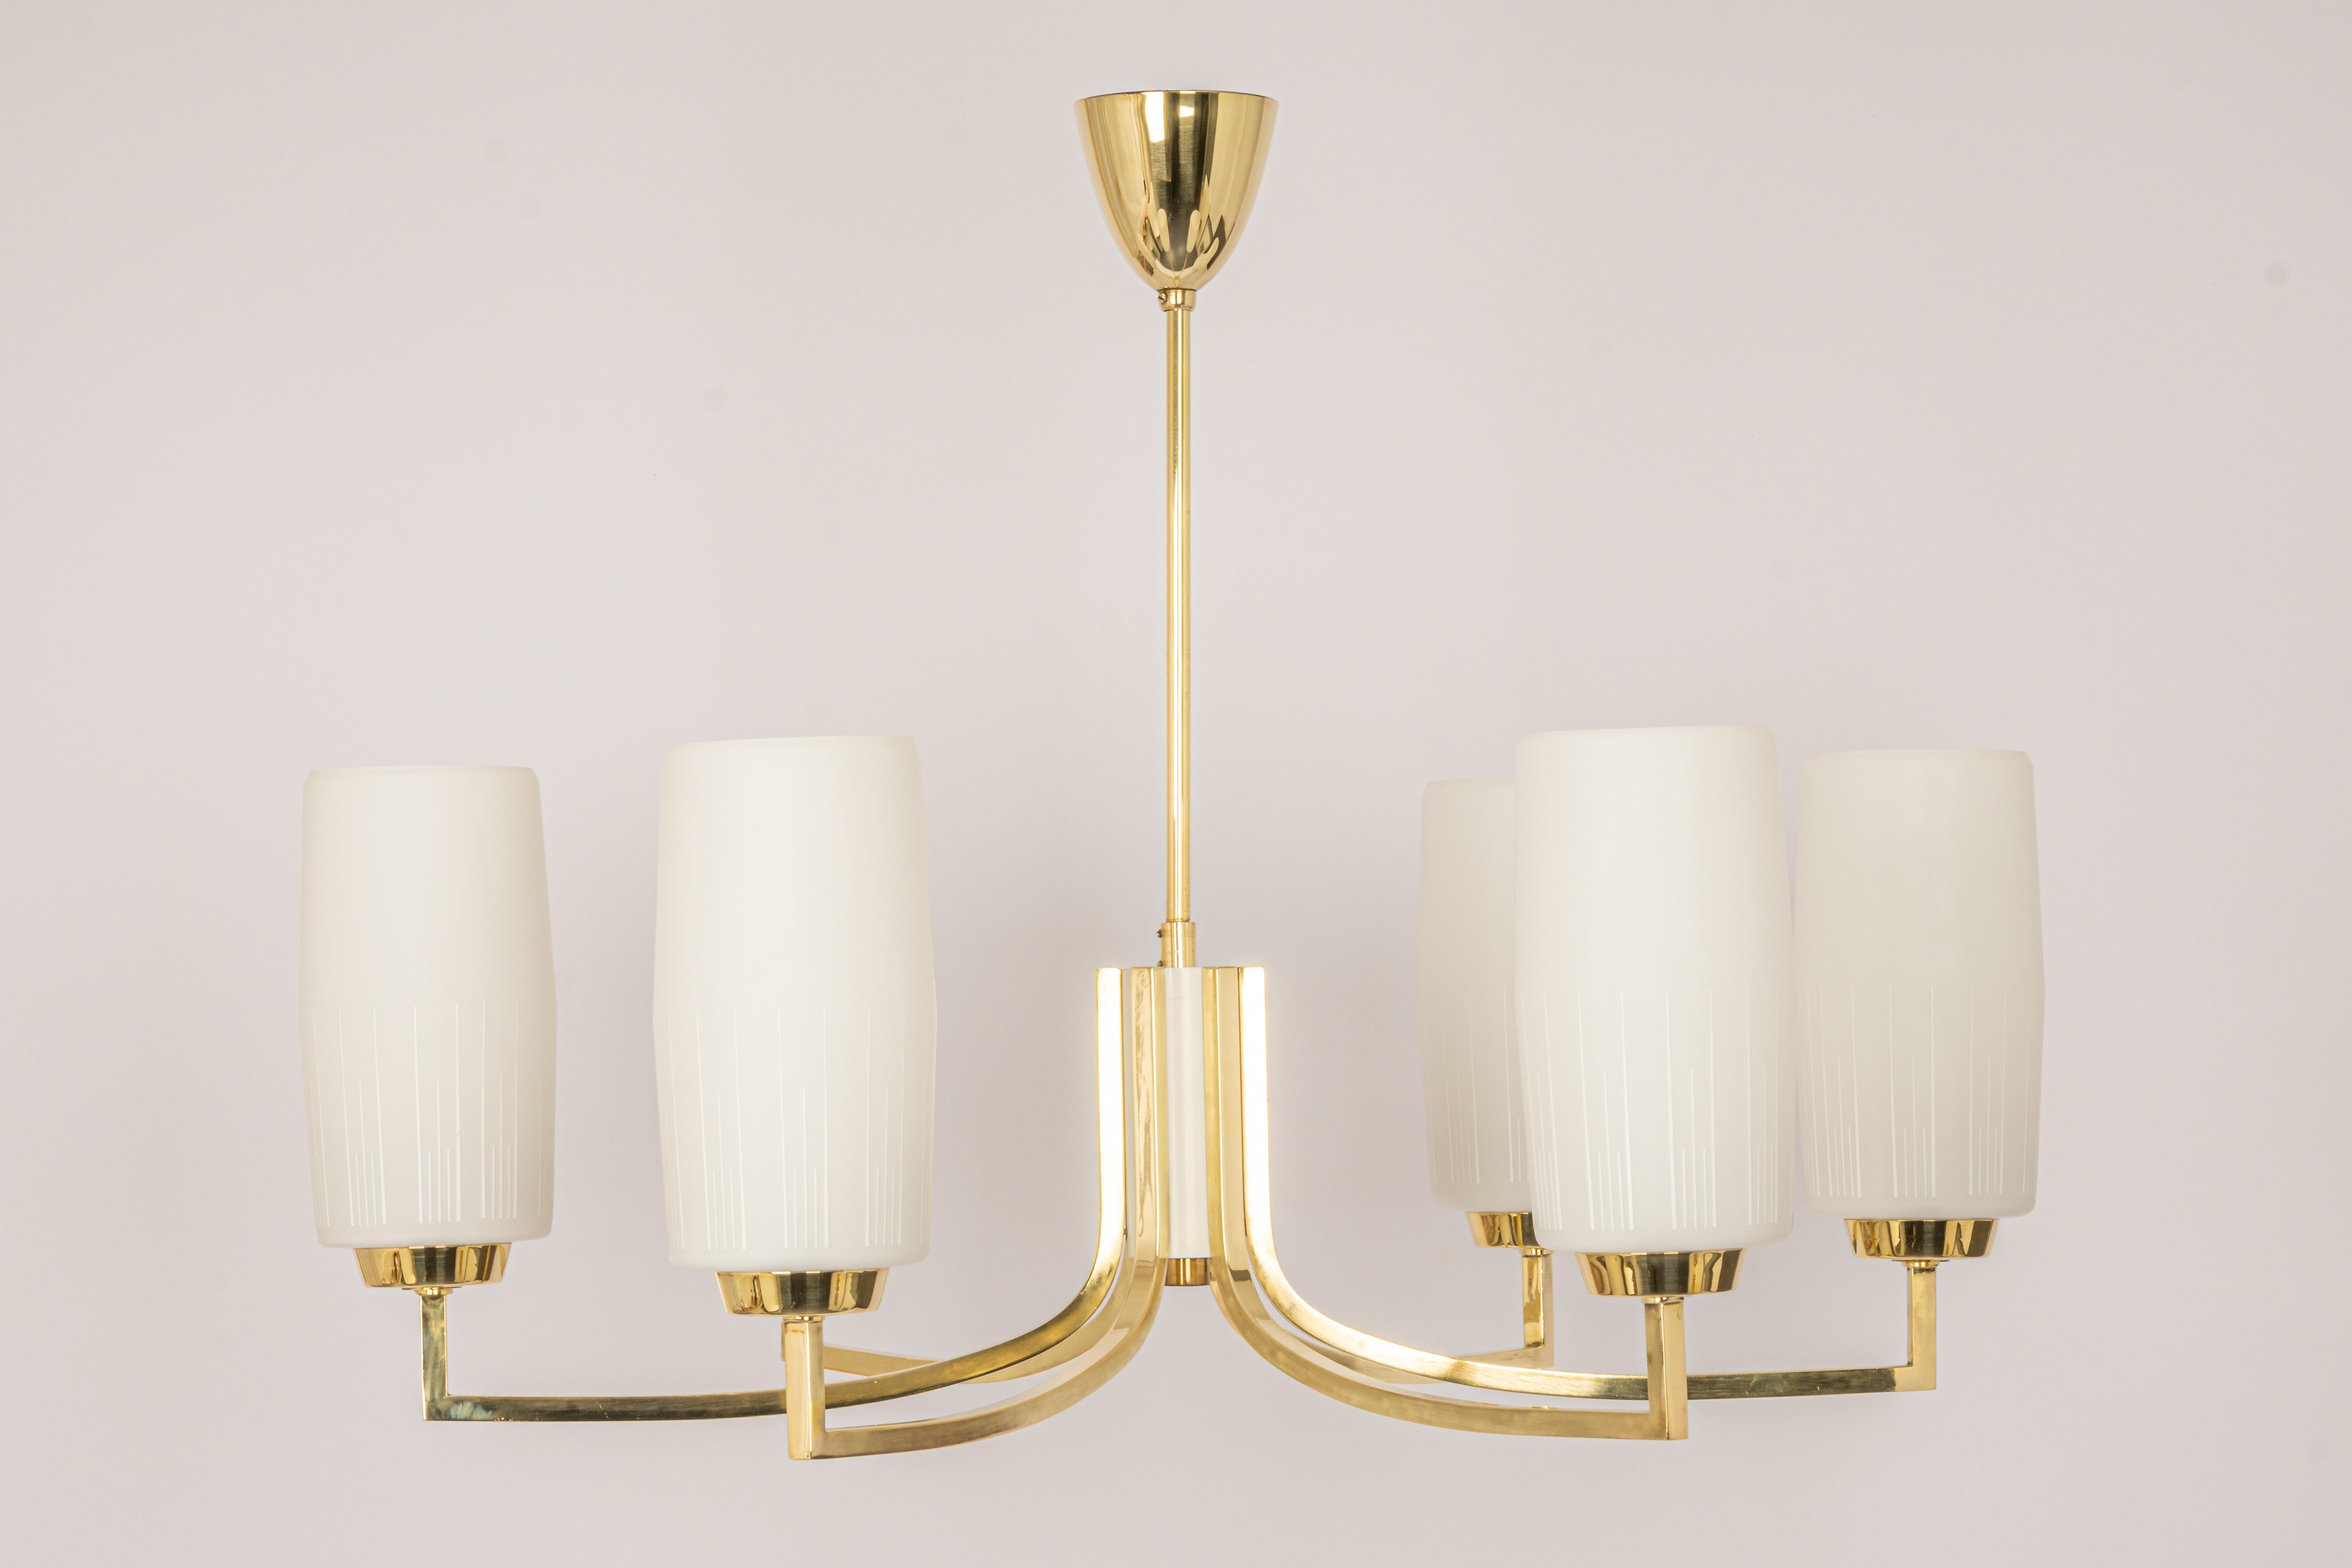 A stunning six-light chandelier in the manner of Stilnovo, Germany, manufactured in circa 1950-1959. A handmade and high-quality piece.
High quality and in a good condition. Cleaned, well-wired, and ready to use.

The fixture requires 6 x E27